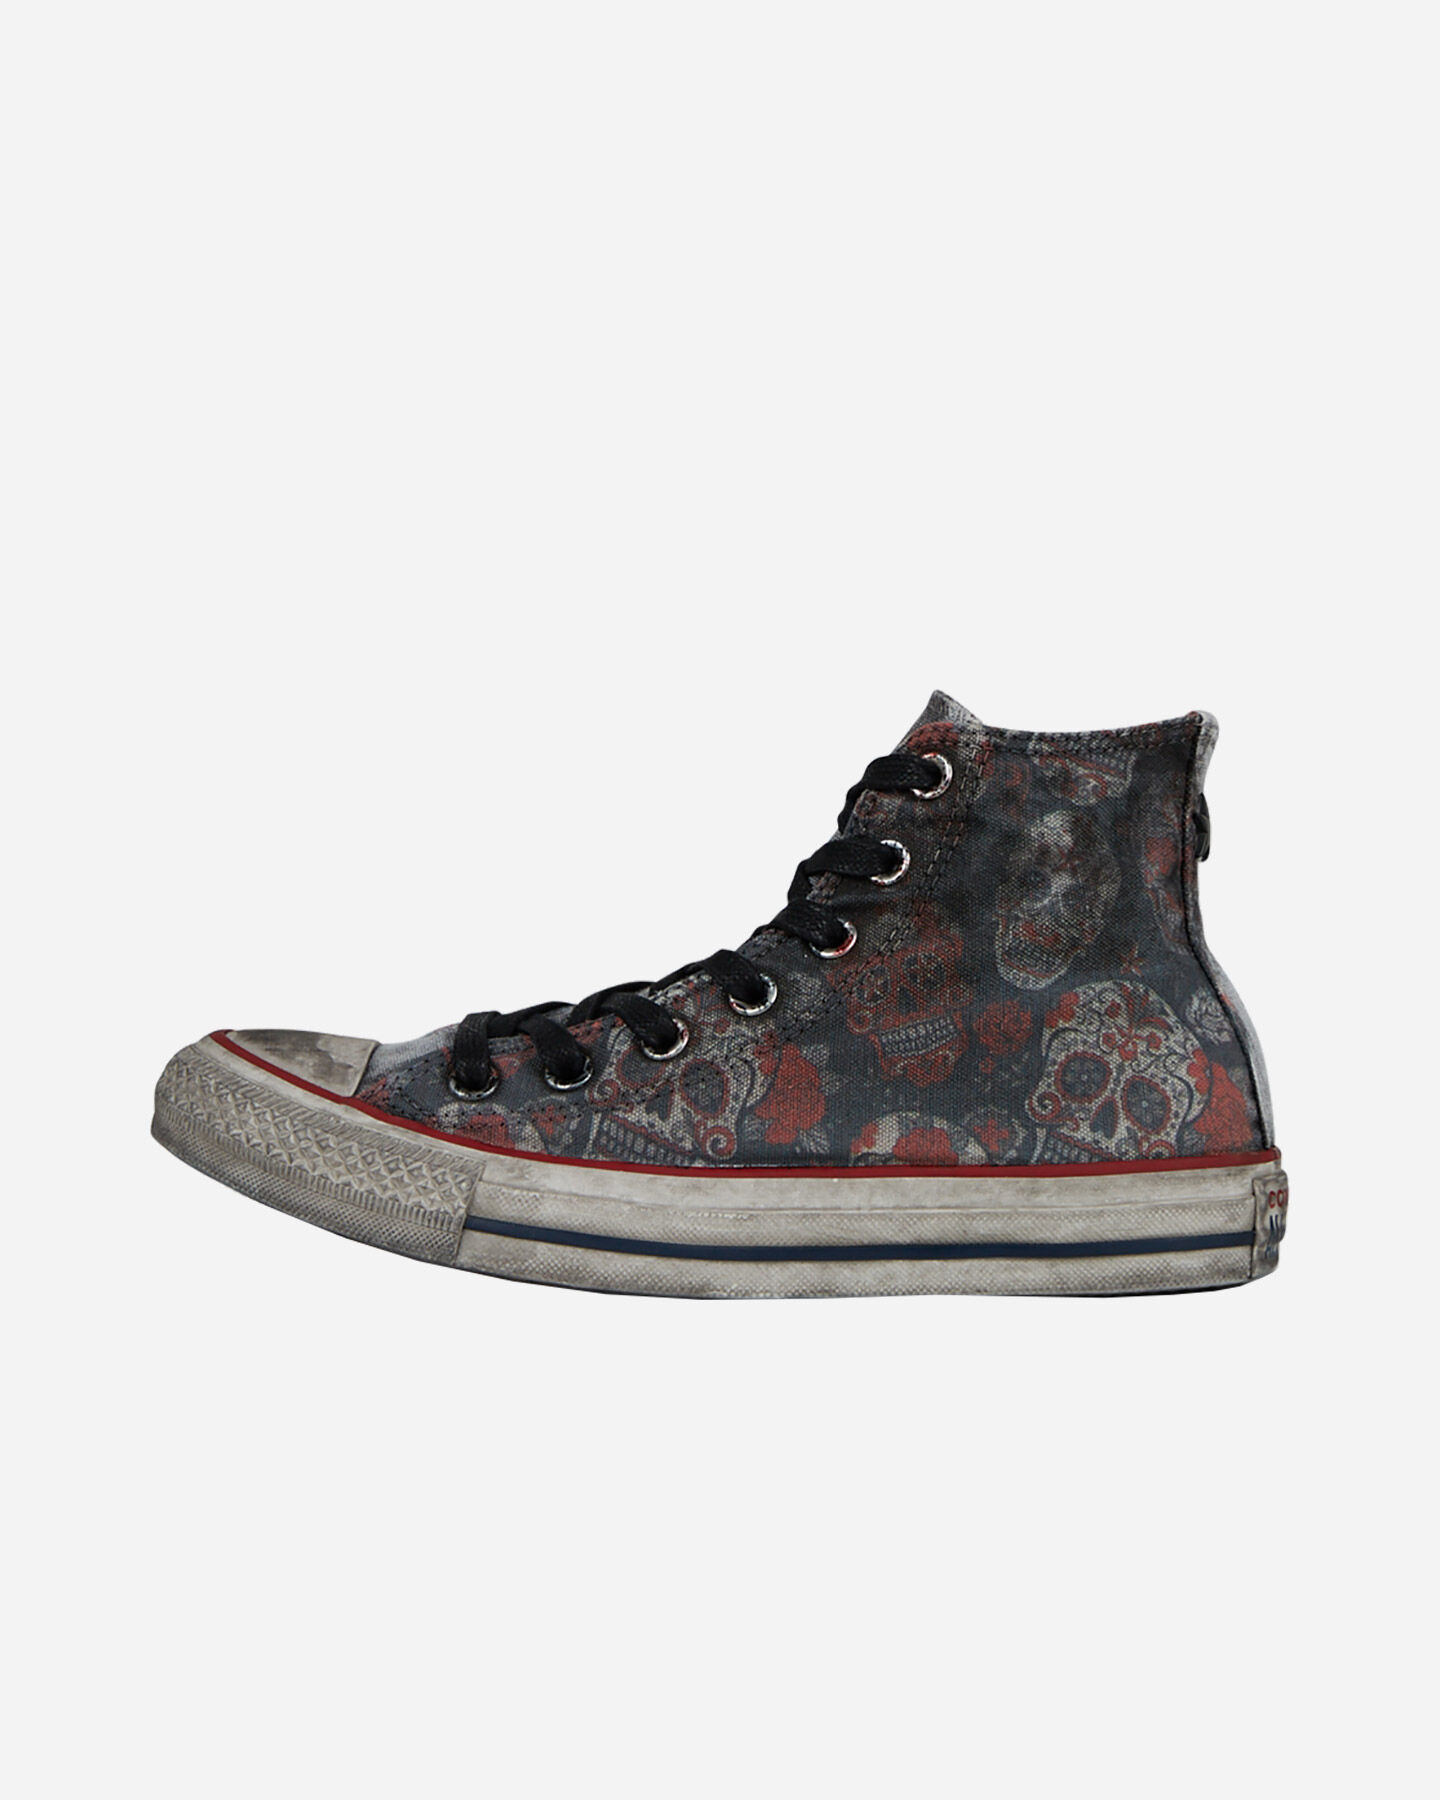 converse limited edition skull